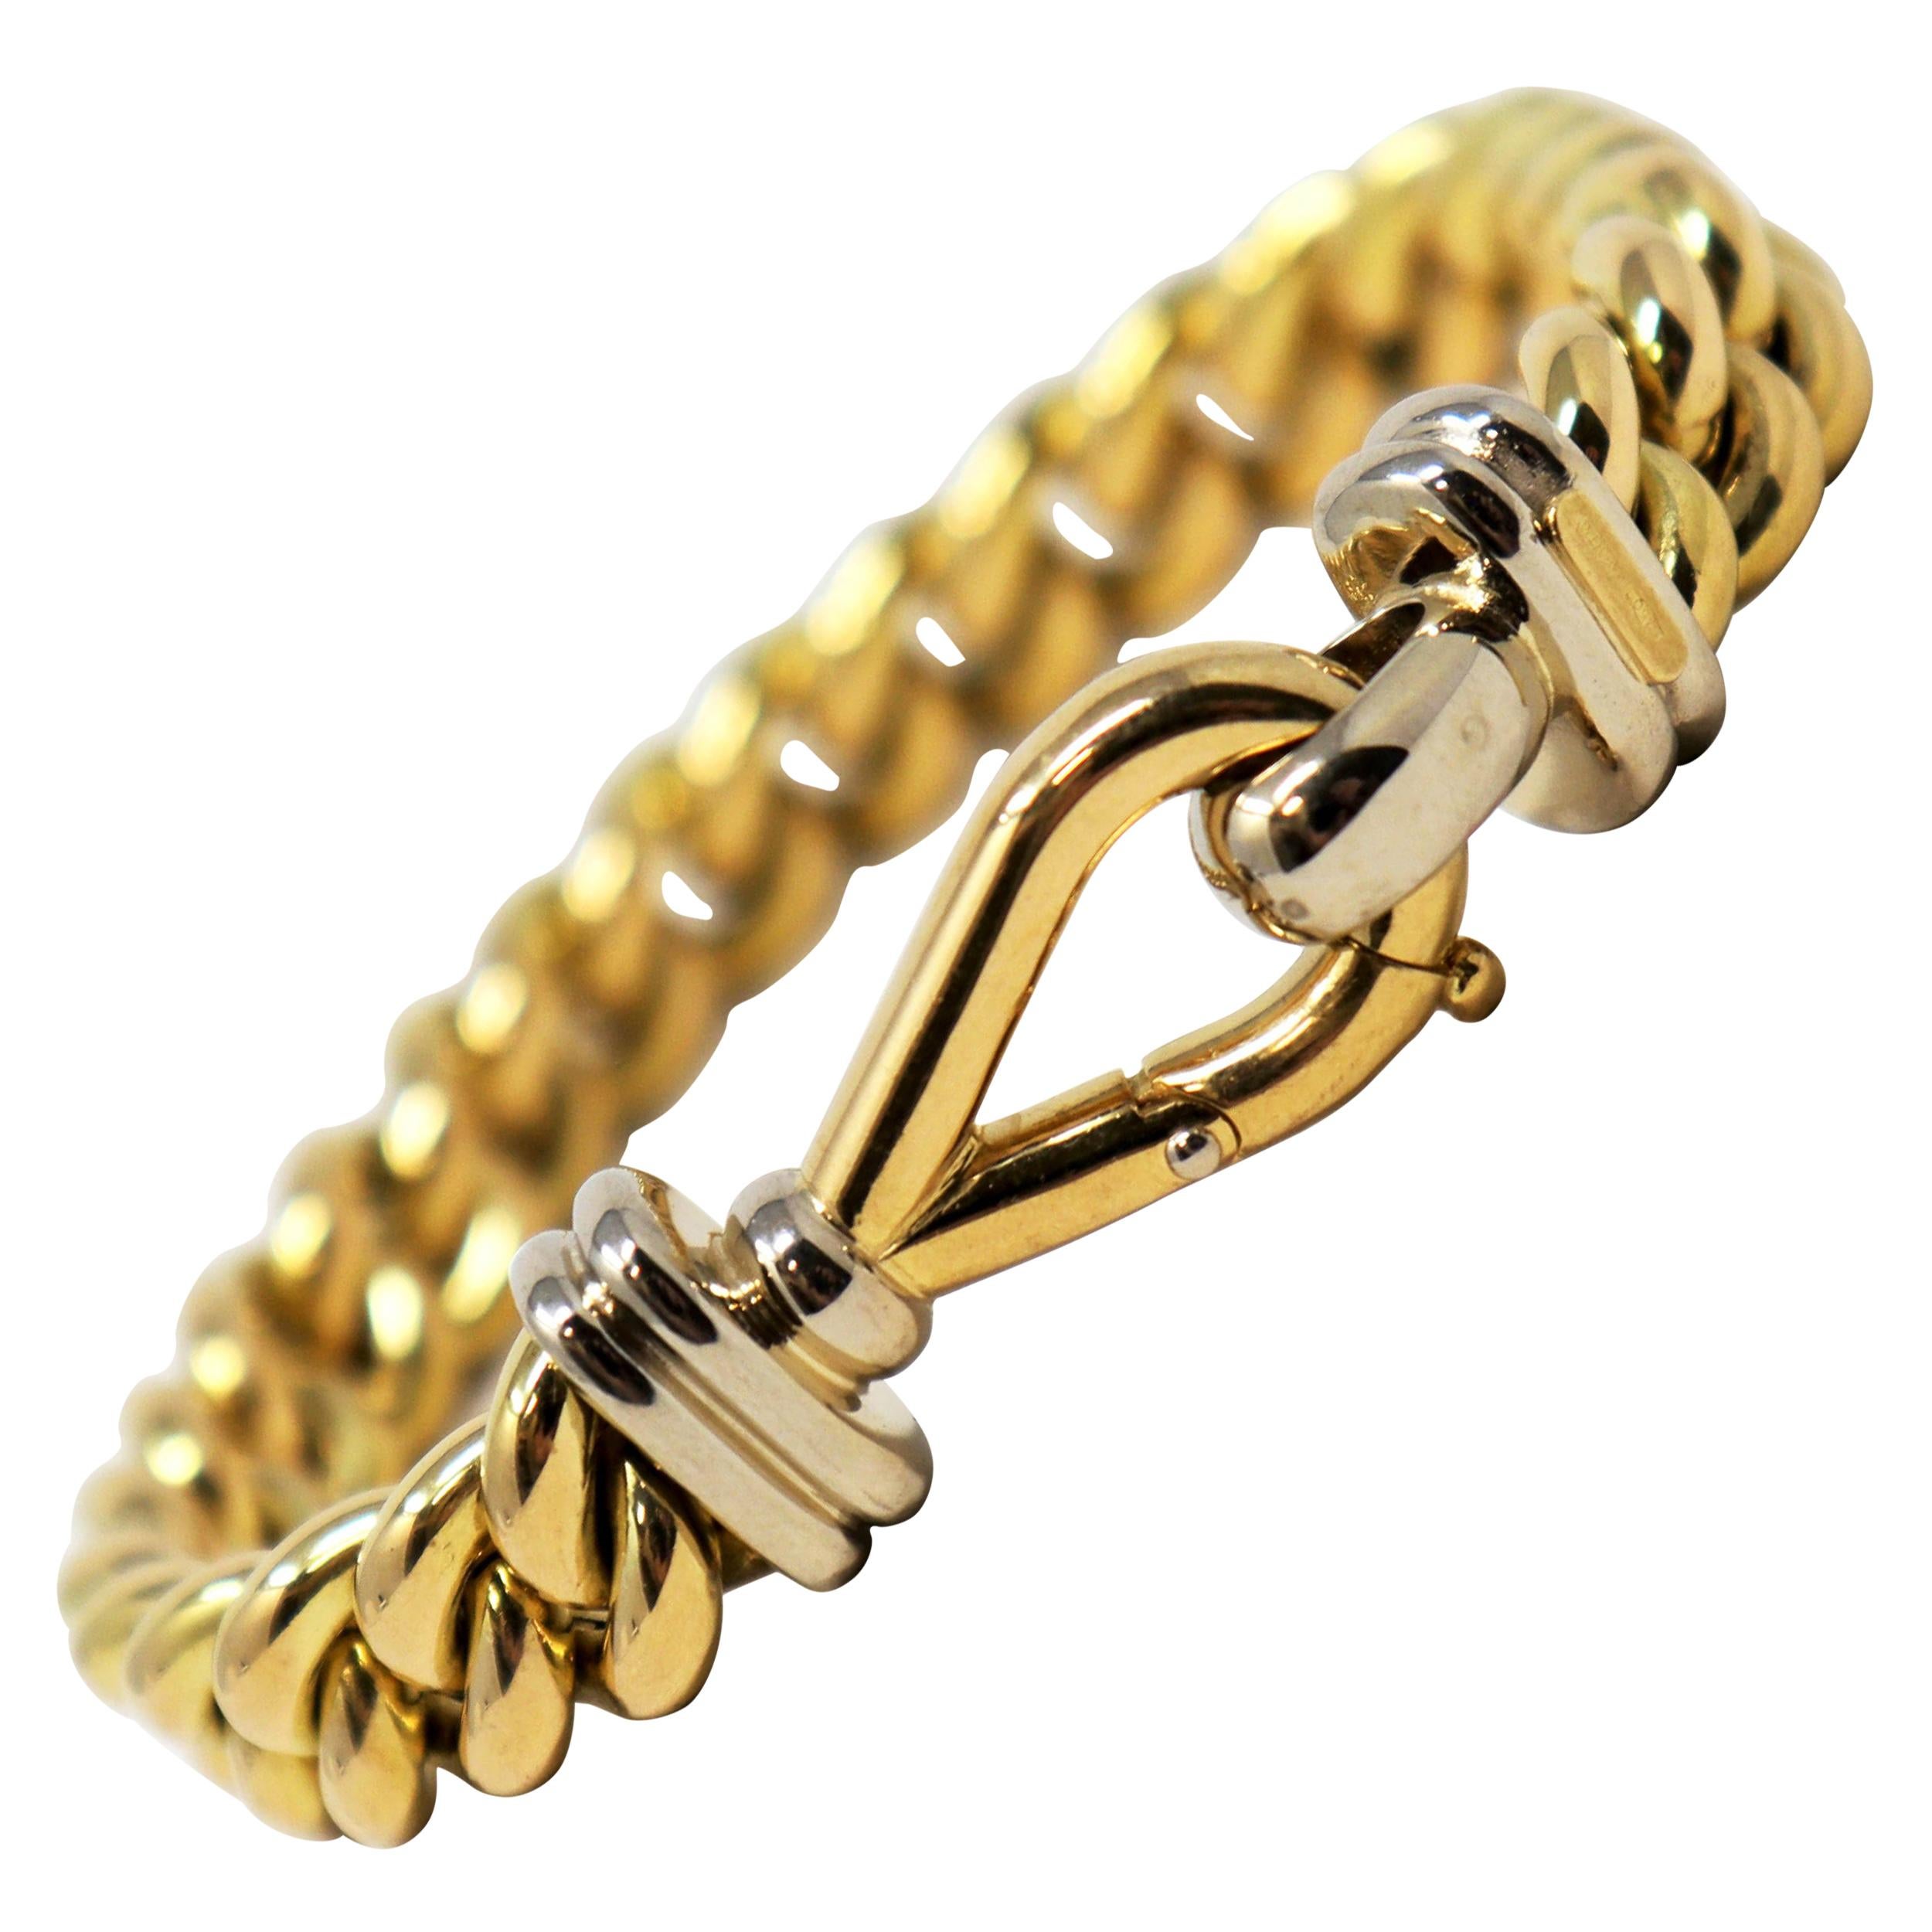 Signoretti Polished 18 Karat Yellow and White Gold Curb Chain Link Bracelet